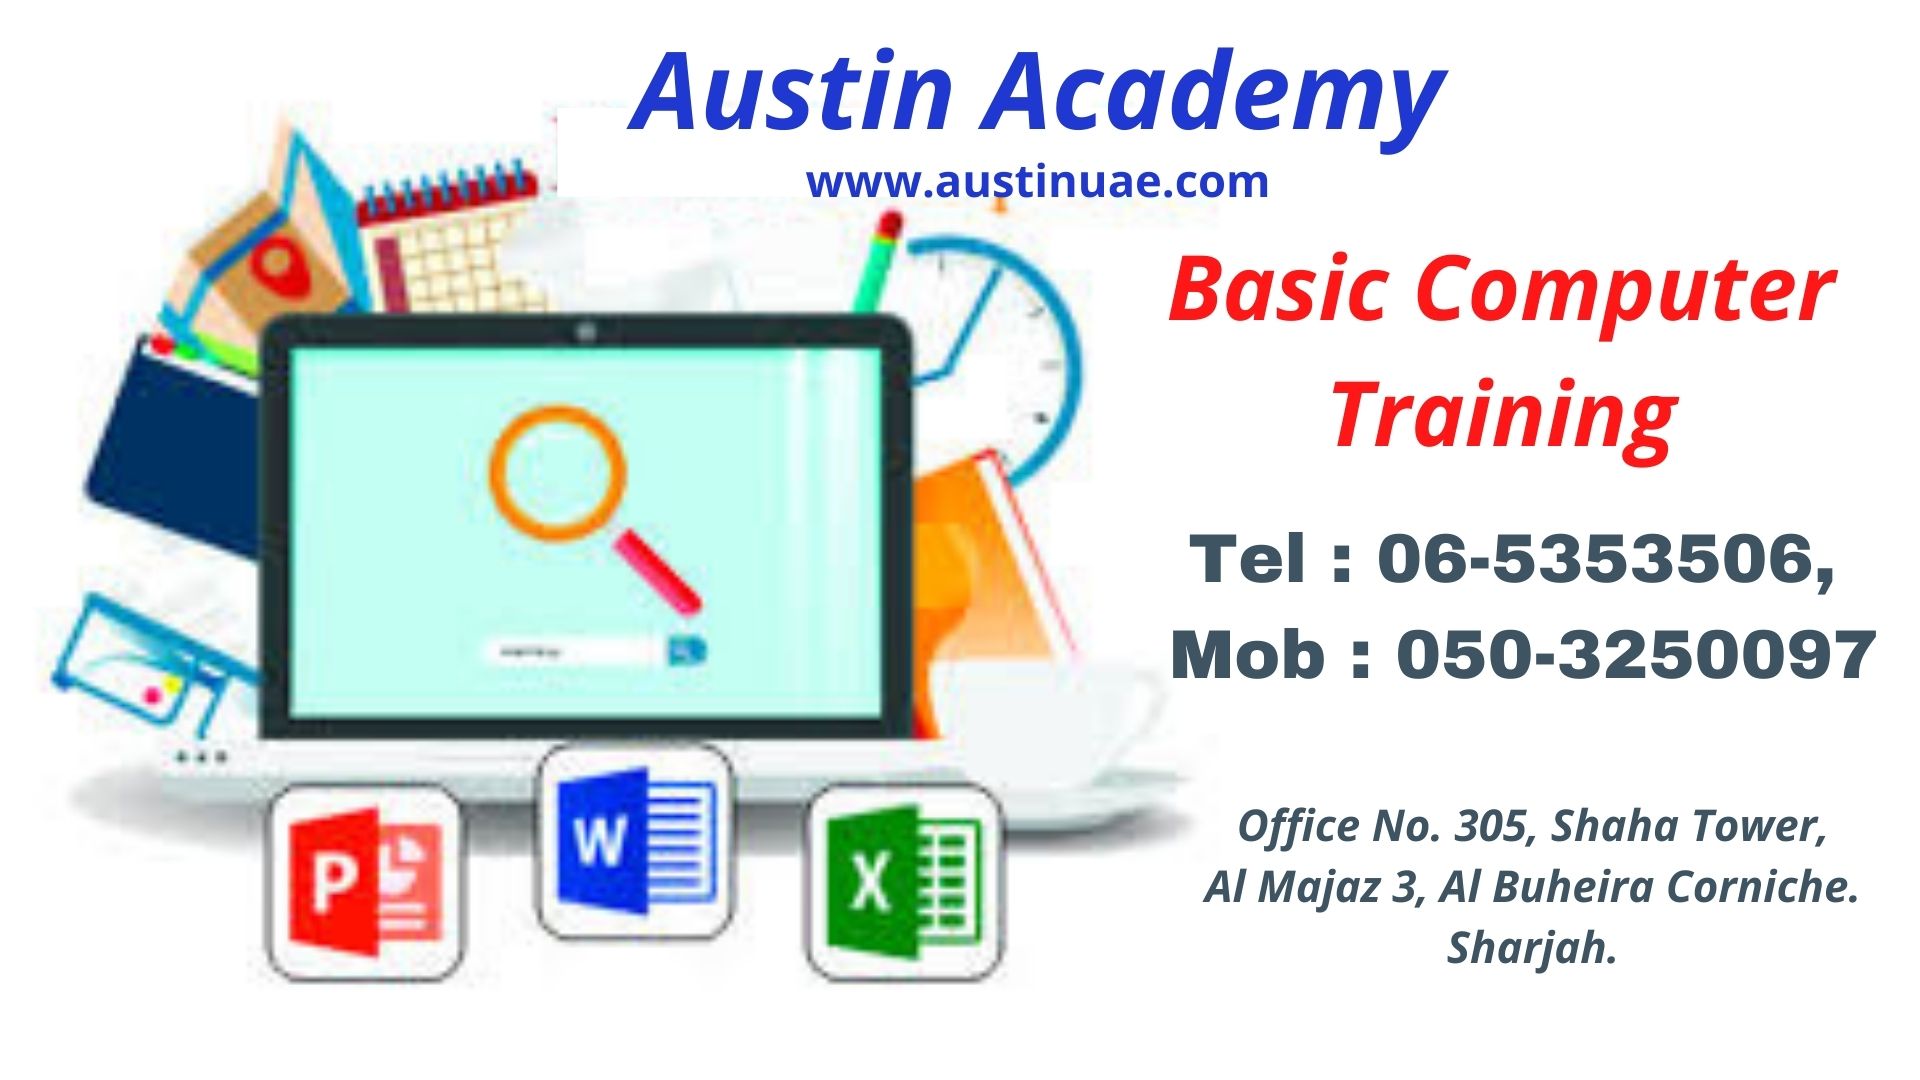 Ms Office Training In Sharjah With Best Discount Call 0503250097